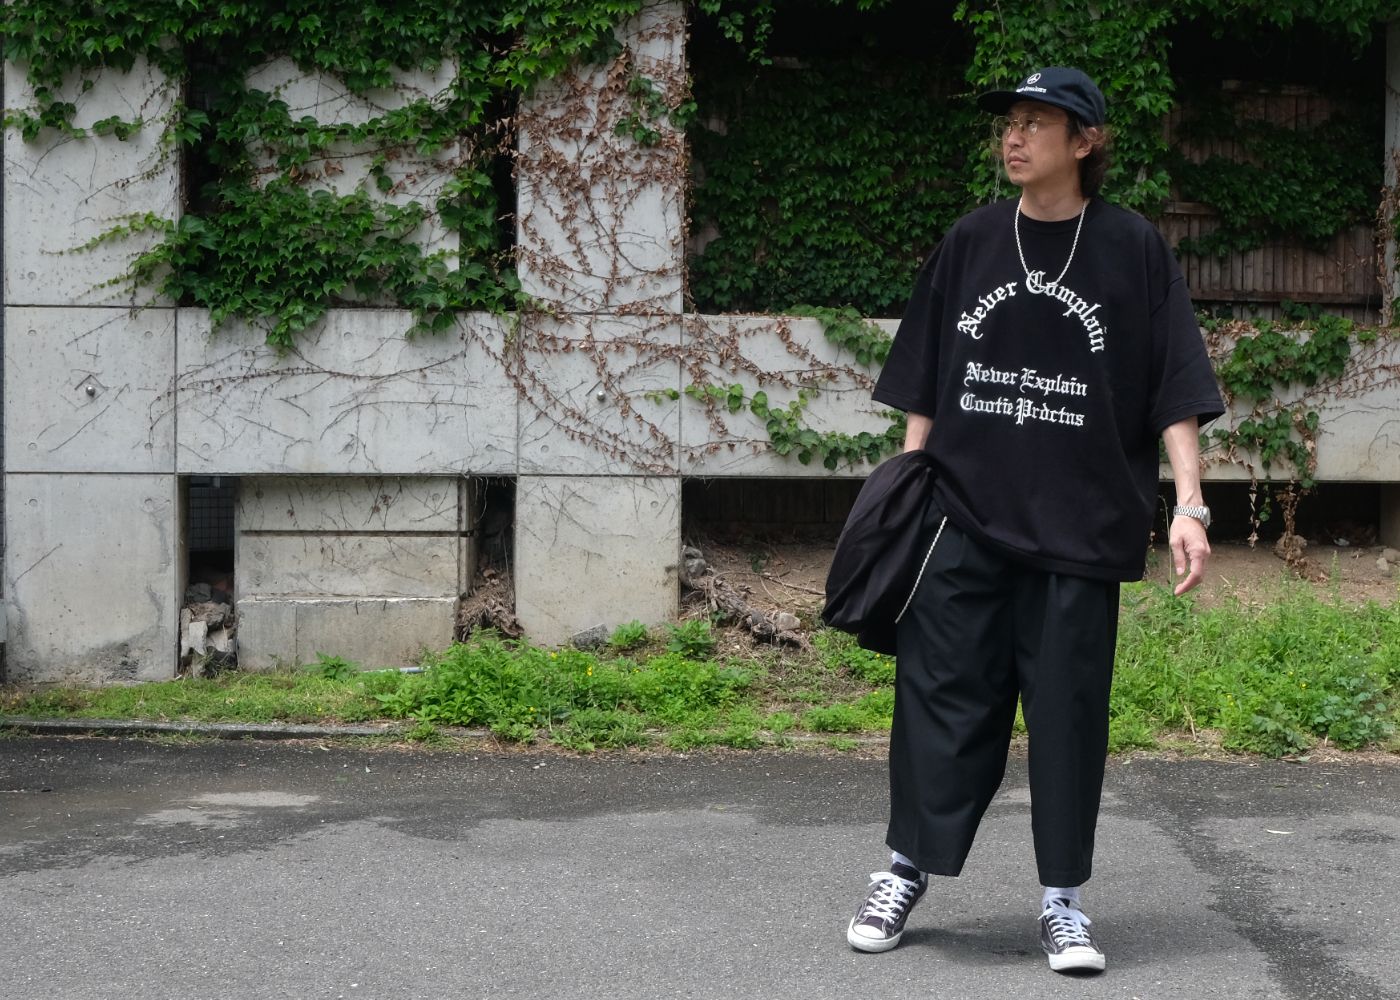 COOTIE PRODUCTIONS - T/R Shin Cut Wide Easy Trousers | LOOPHOLE